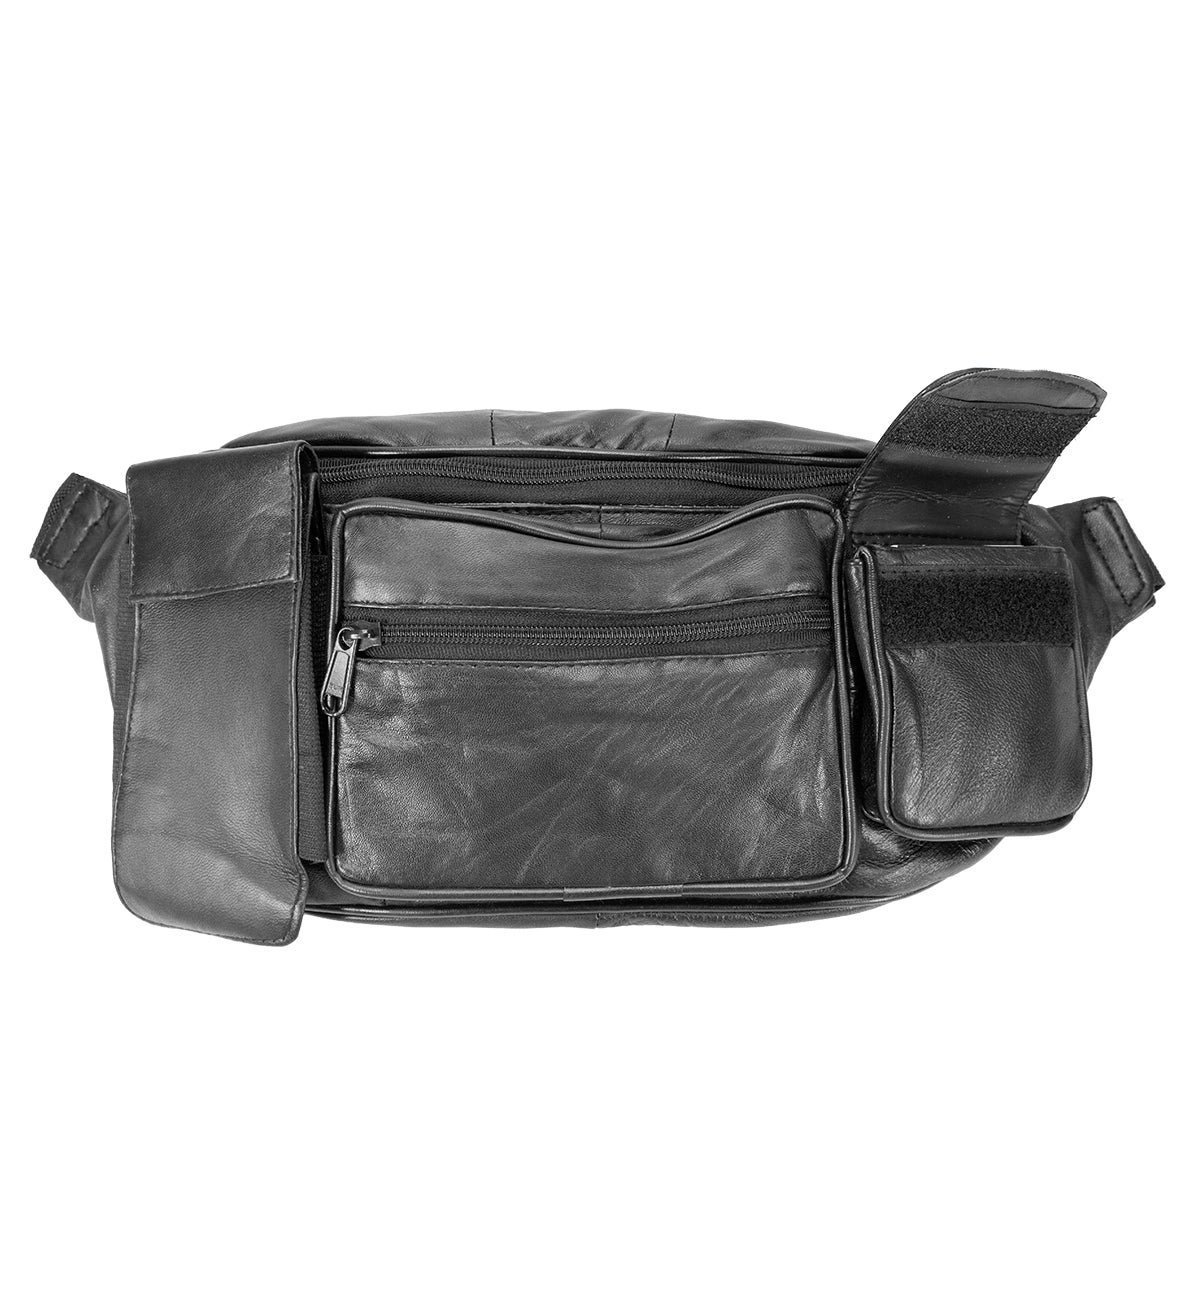 Genuine Leather Waist Fanny Pack Belt Bag Pouch Travel Hip Purse Cell Phone Pocket Dual Phone Holder